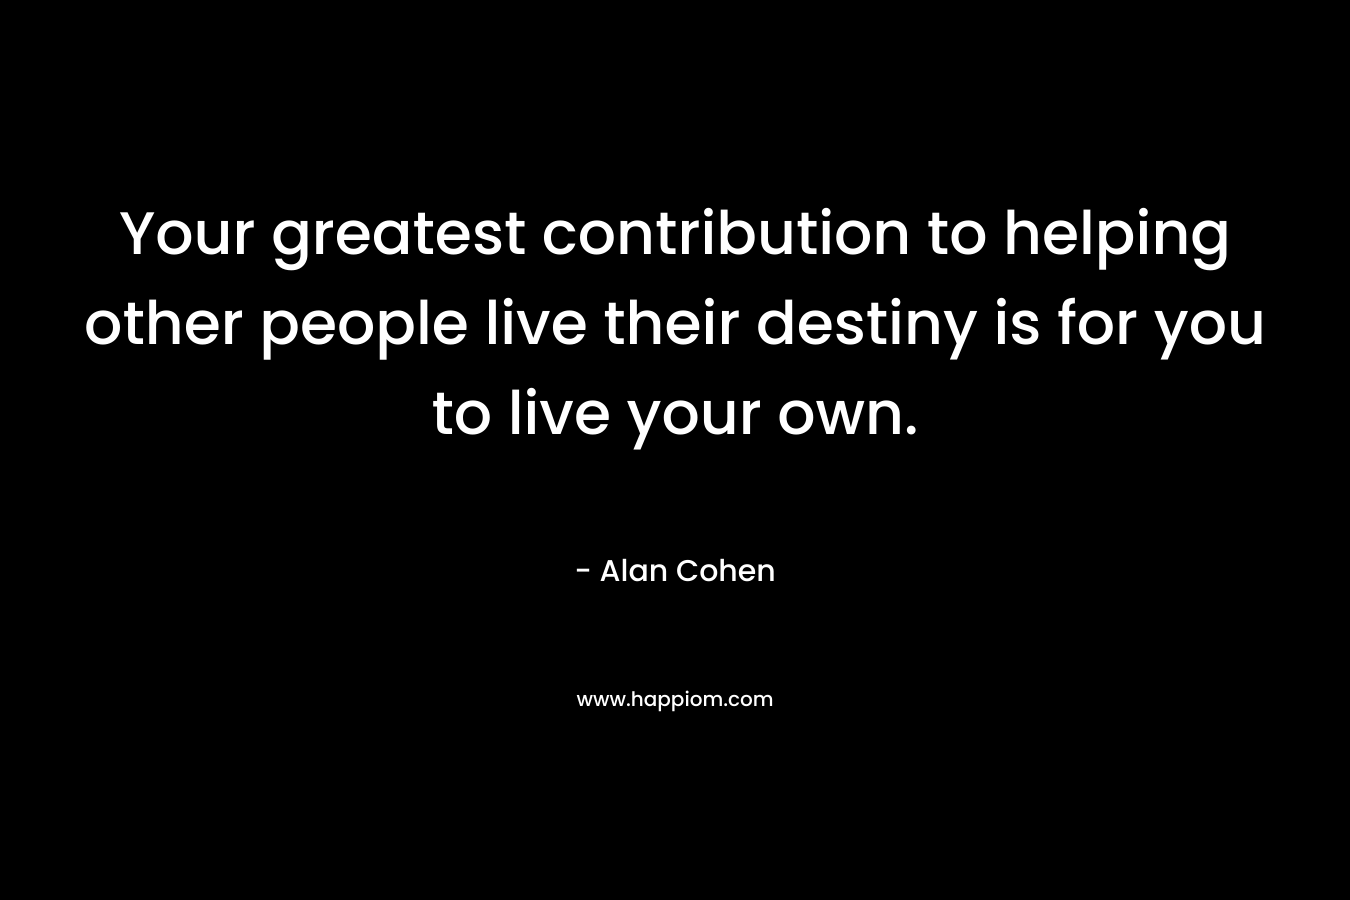 Your greatest contribution to helping other people live their destiny is for you to live your own.